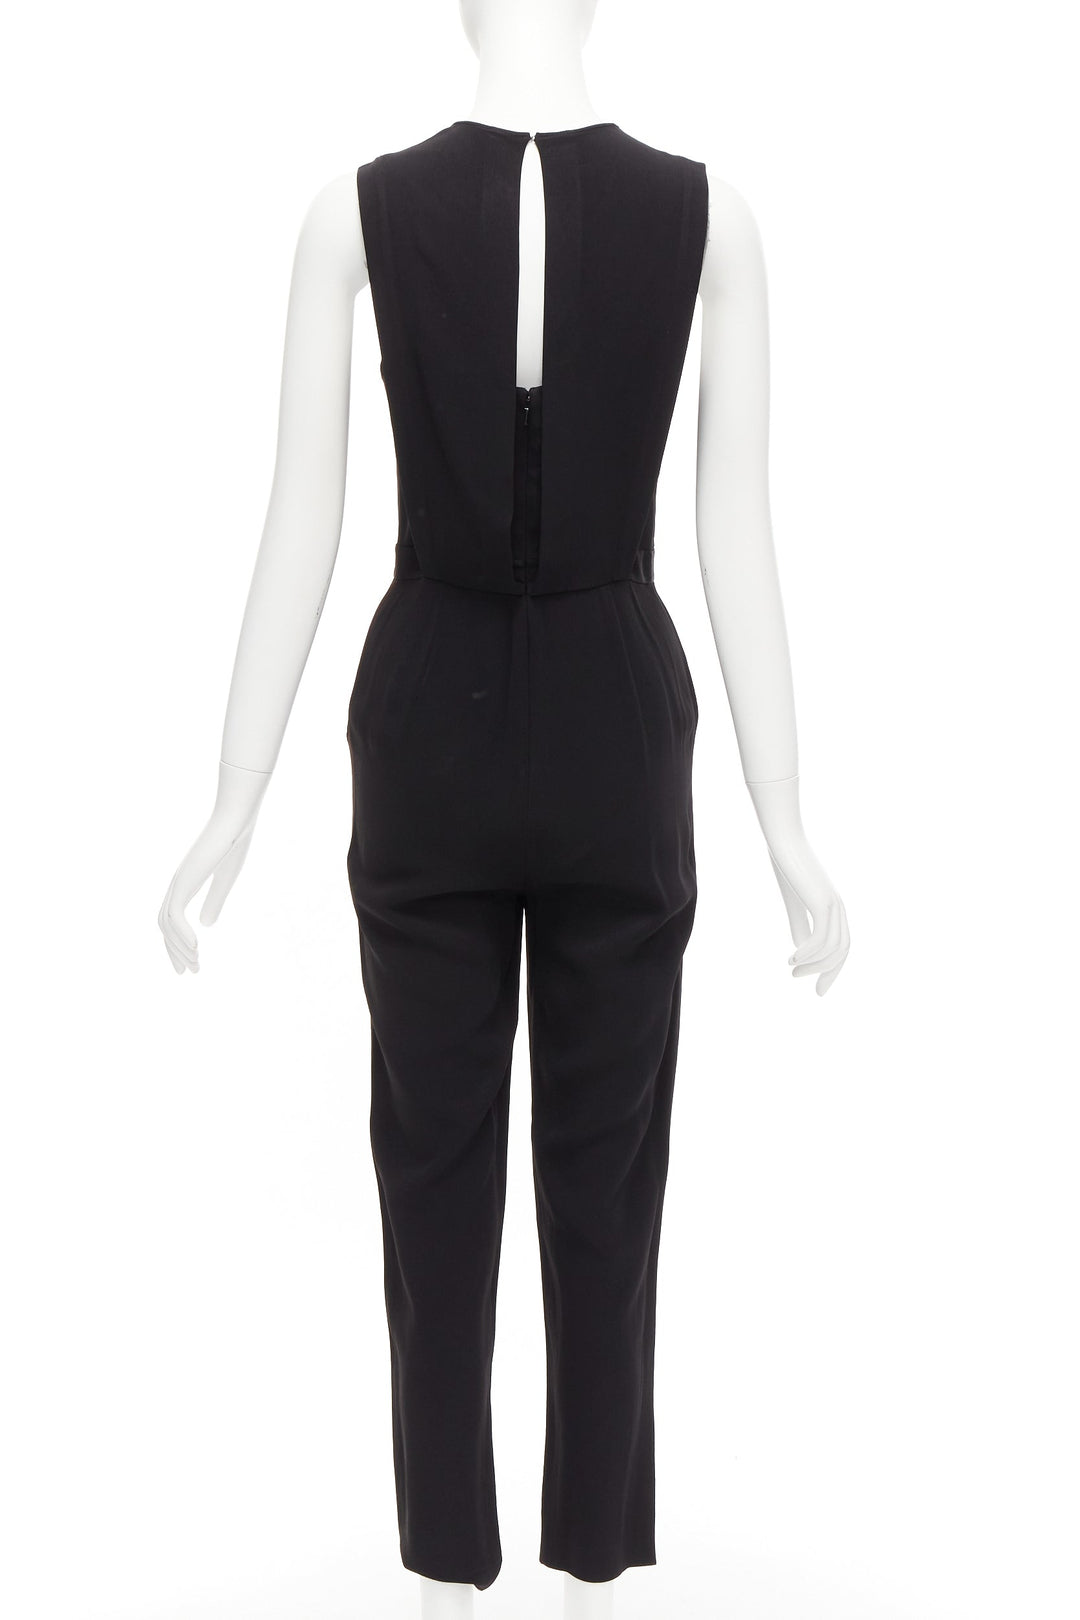 THEORY black layered top back zip cropped sleeveless jumpsuit US0 XS